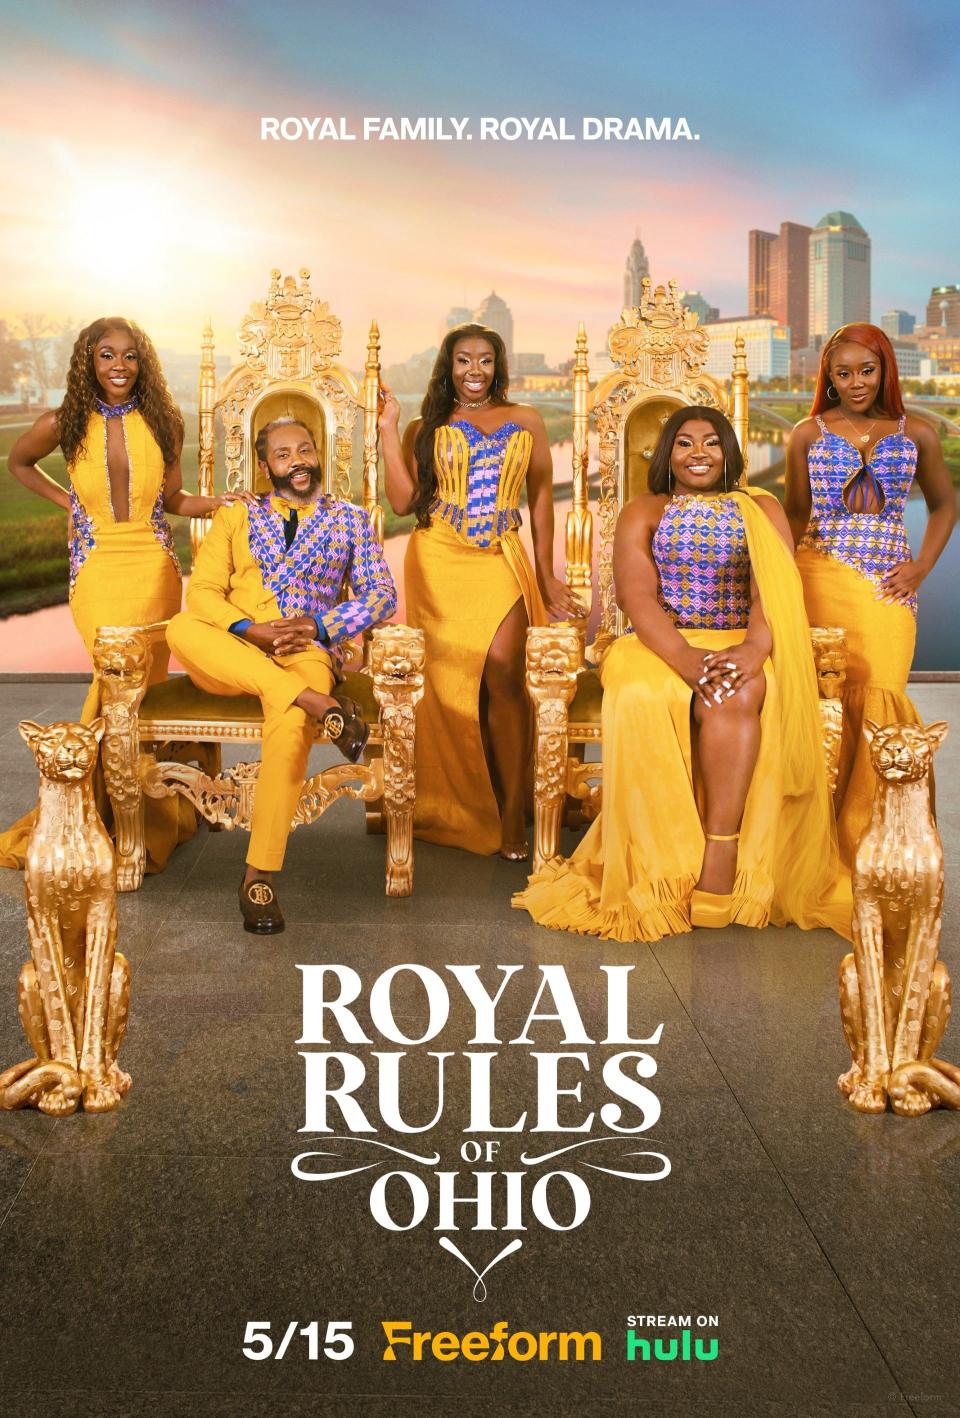 The new series, "Royal Rules of Ohio," portrays the lifestyle of three young sisters who must balance enjoying life in their 20s with the responsibility of upholding their reputation as Ghanaian royals.